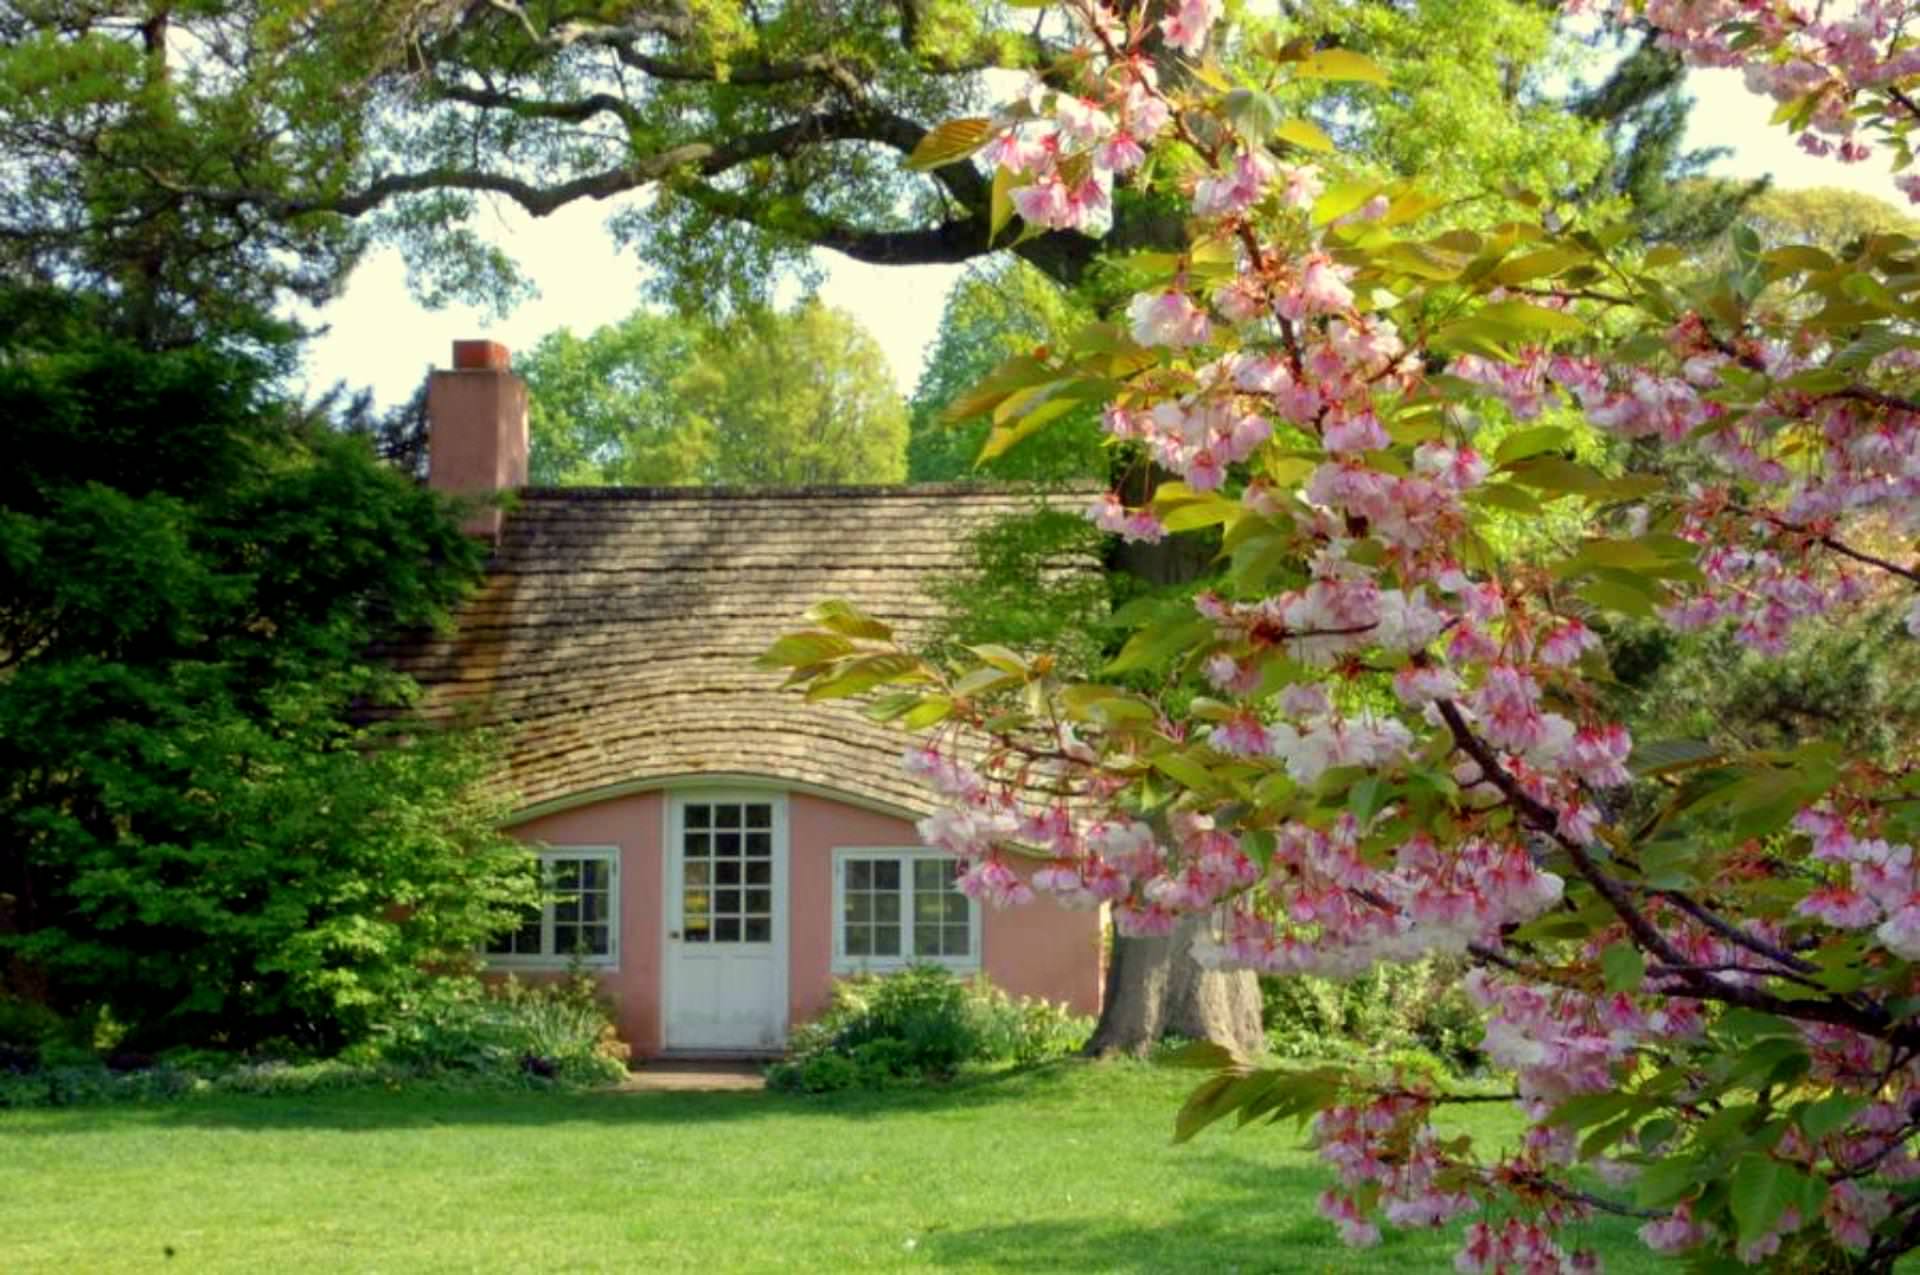 55 Cottage Computer Wallpapers   Download at WallpaperBro